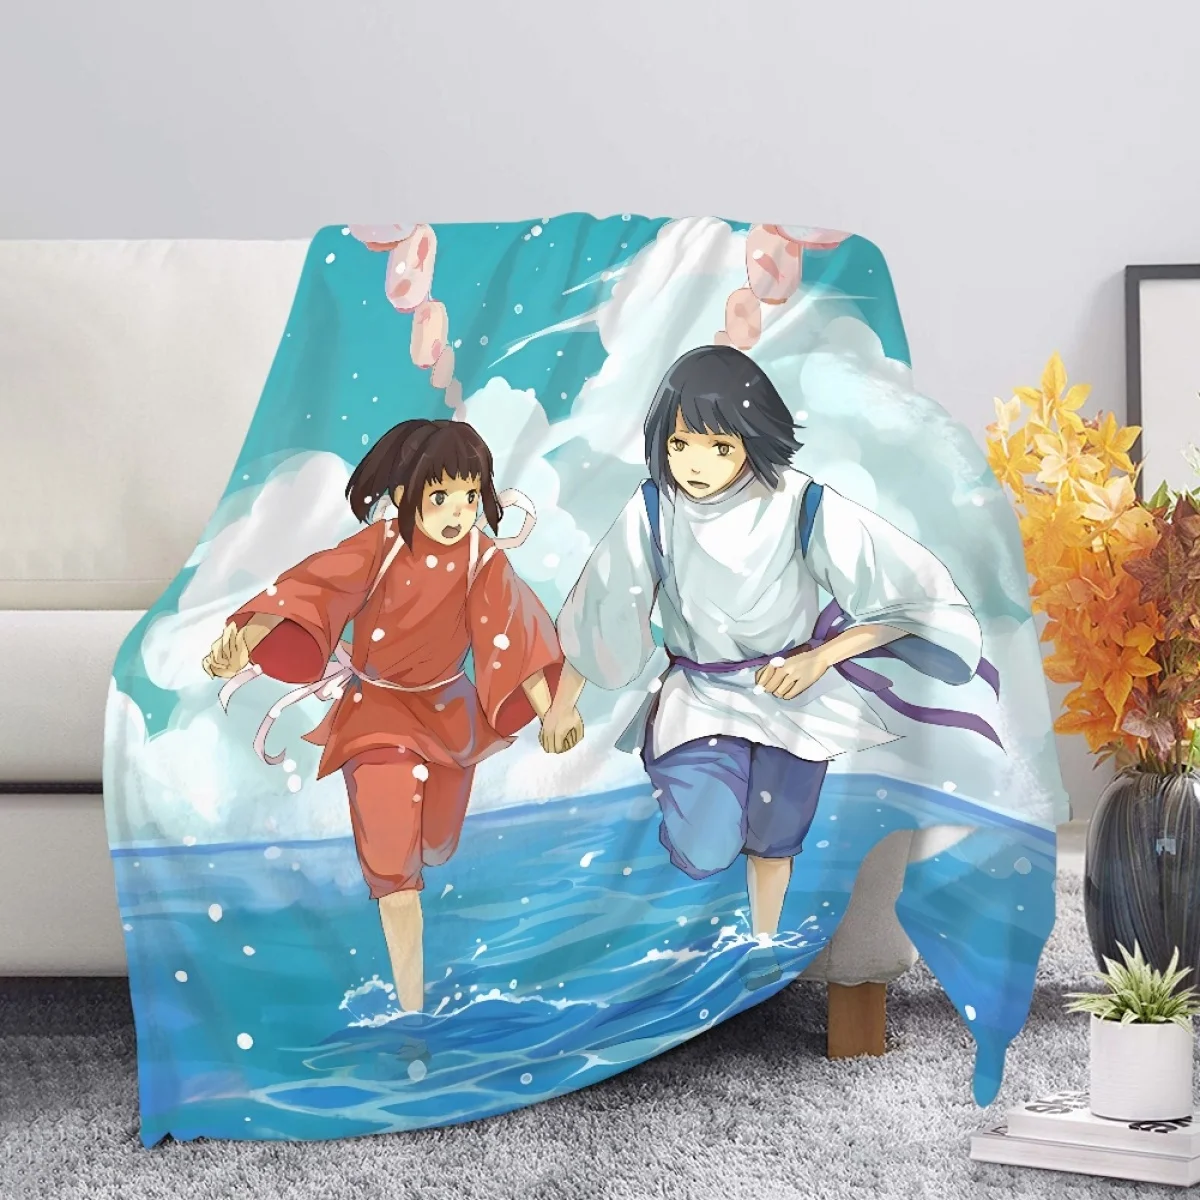 

Spirited Away Cartoon Designer Blankets Soft Beach Picnic Flannel Blanket Mom To Daughter/Son Gift Quilt Sofa Bed Sheet Home New